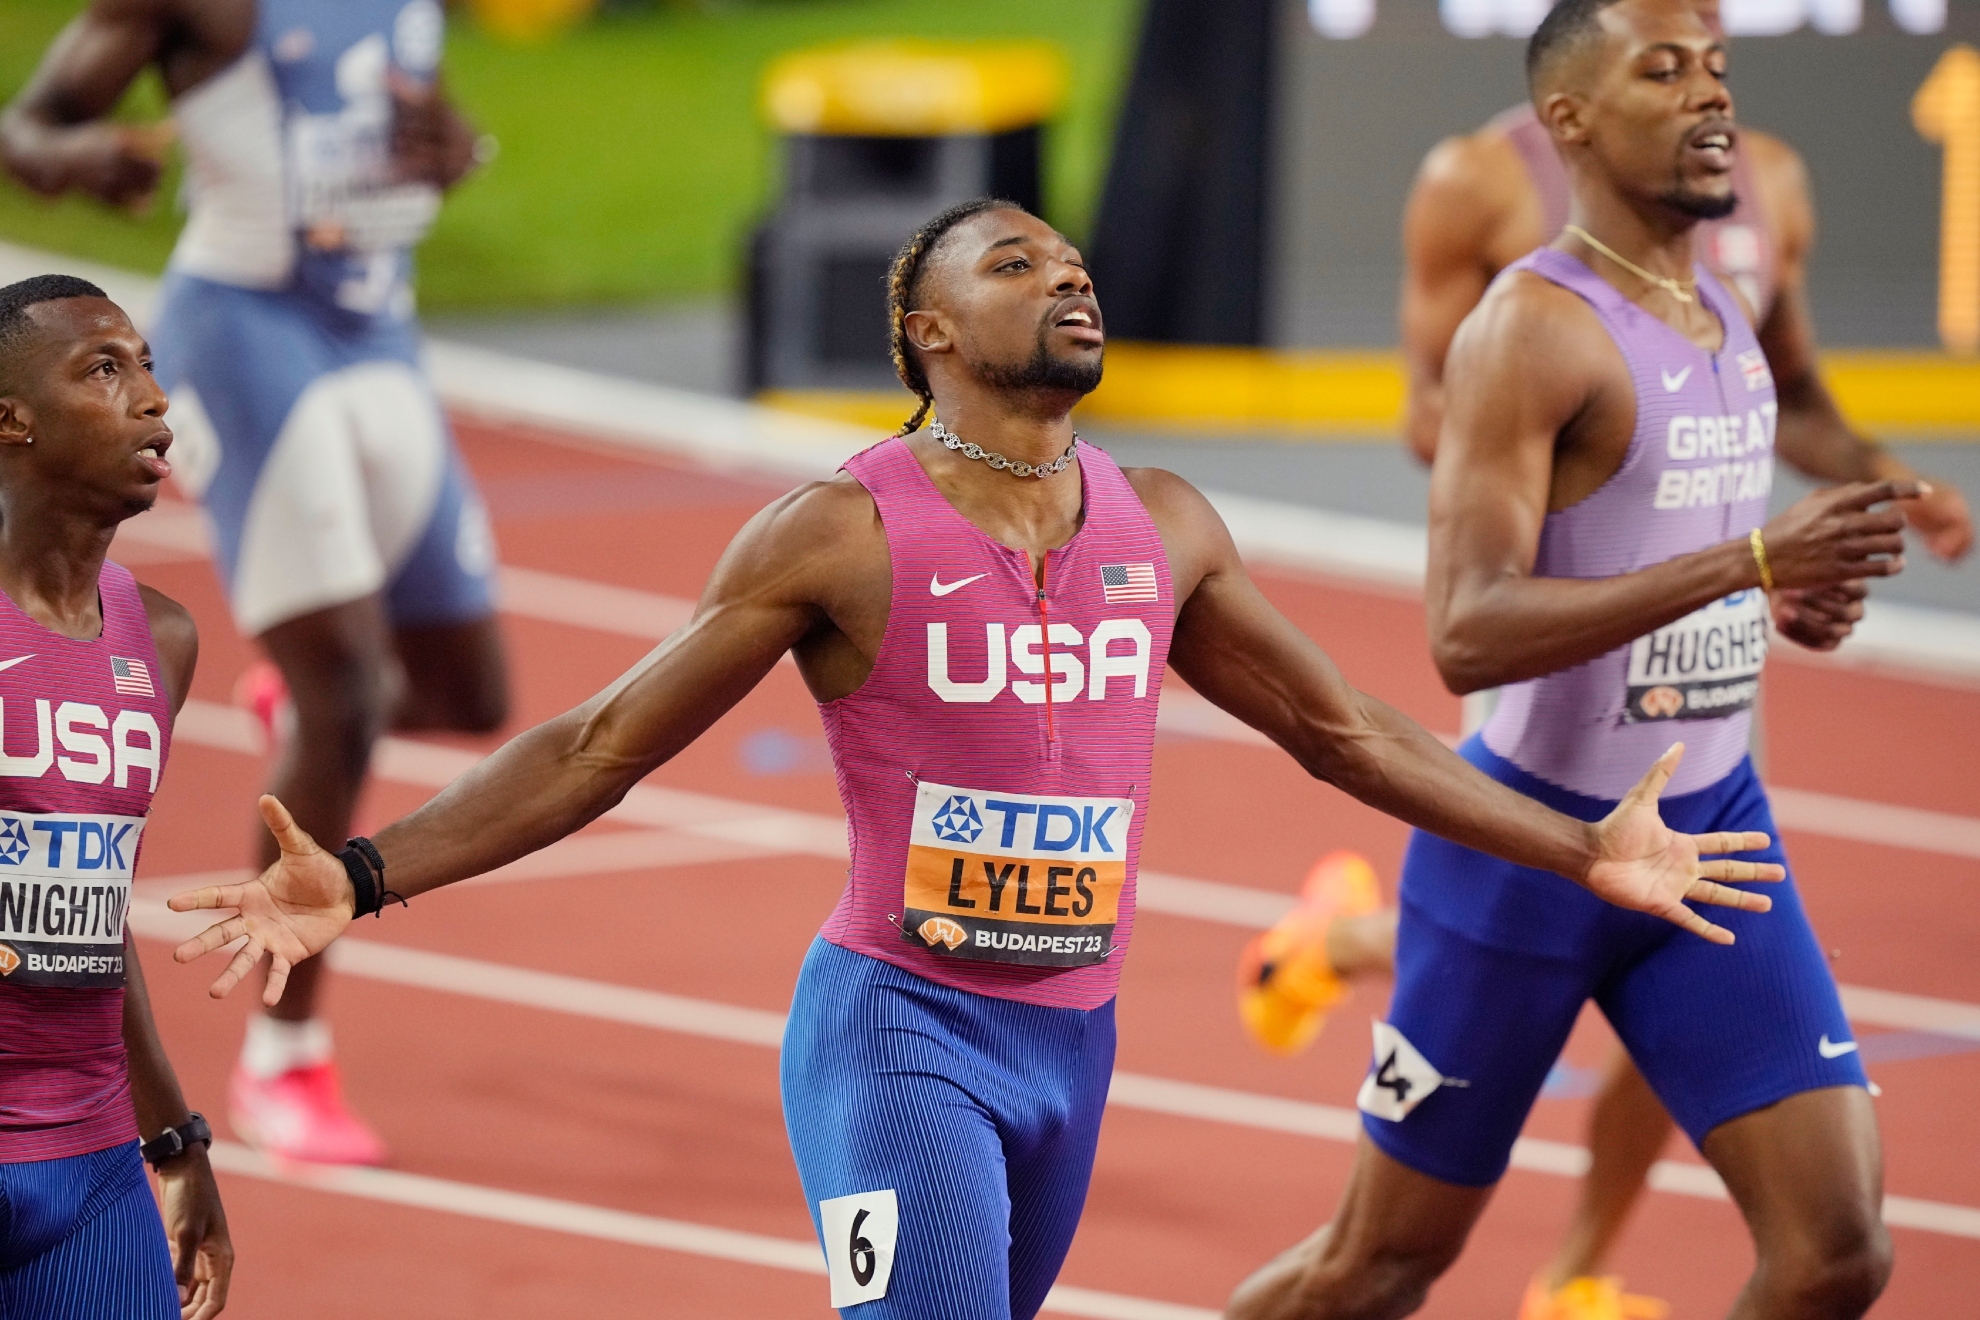 Noah Lyles in one of the 60m races at the World Short Track Championships in Glasgow.